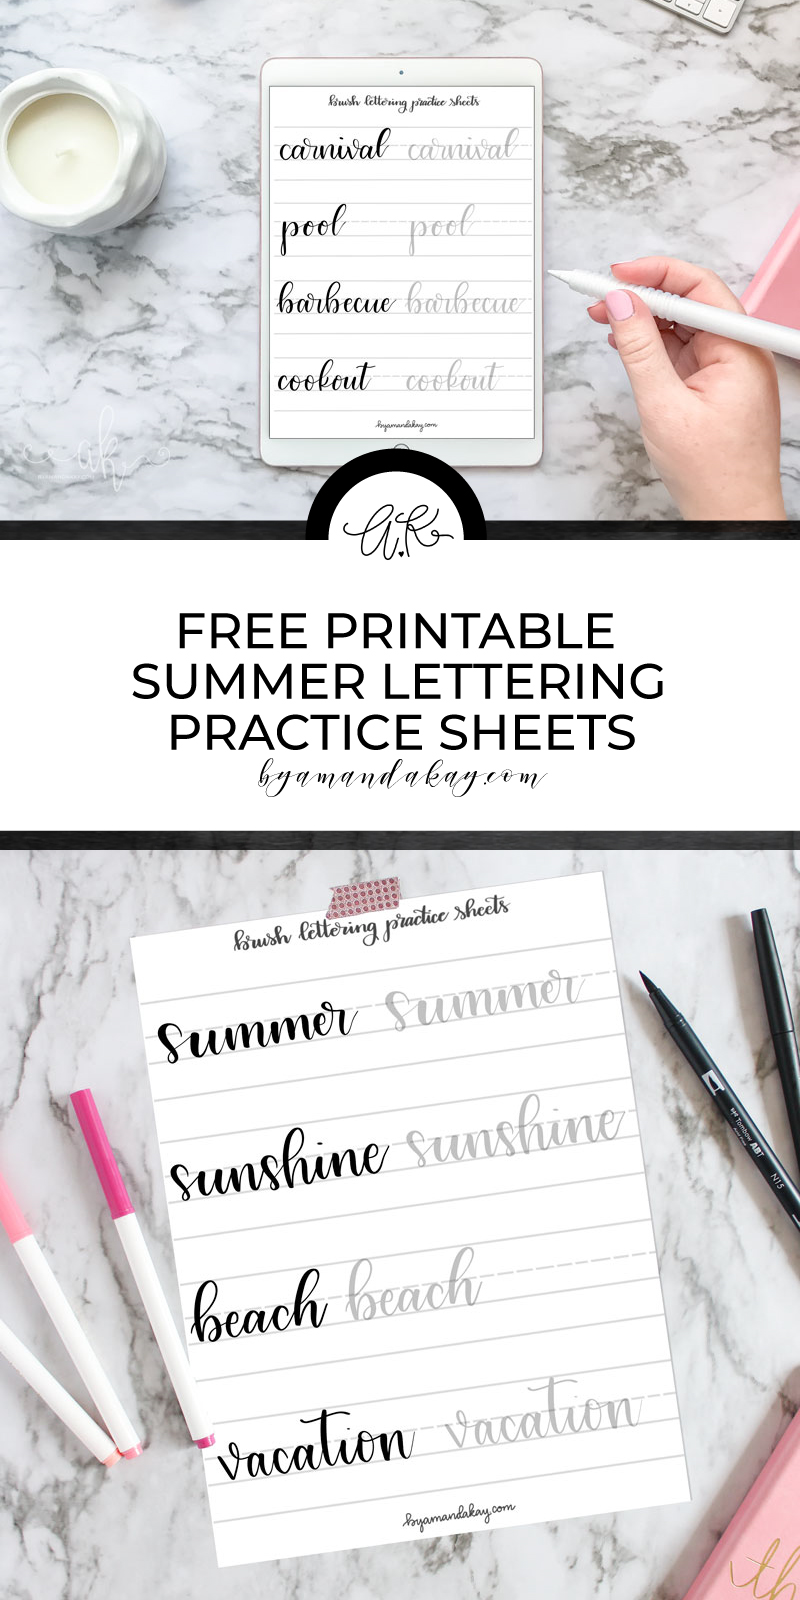 free printable summer lettering practice sheets